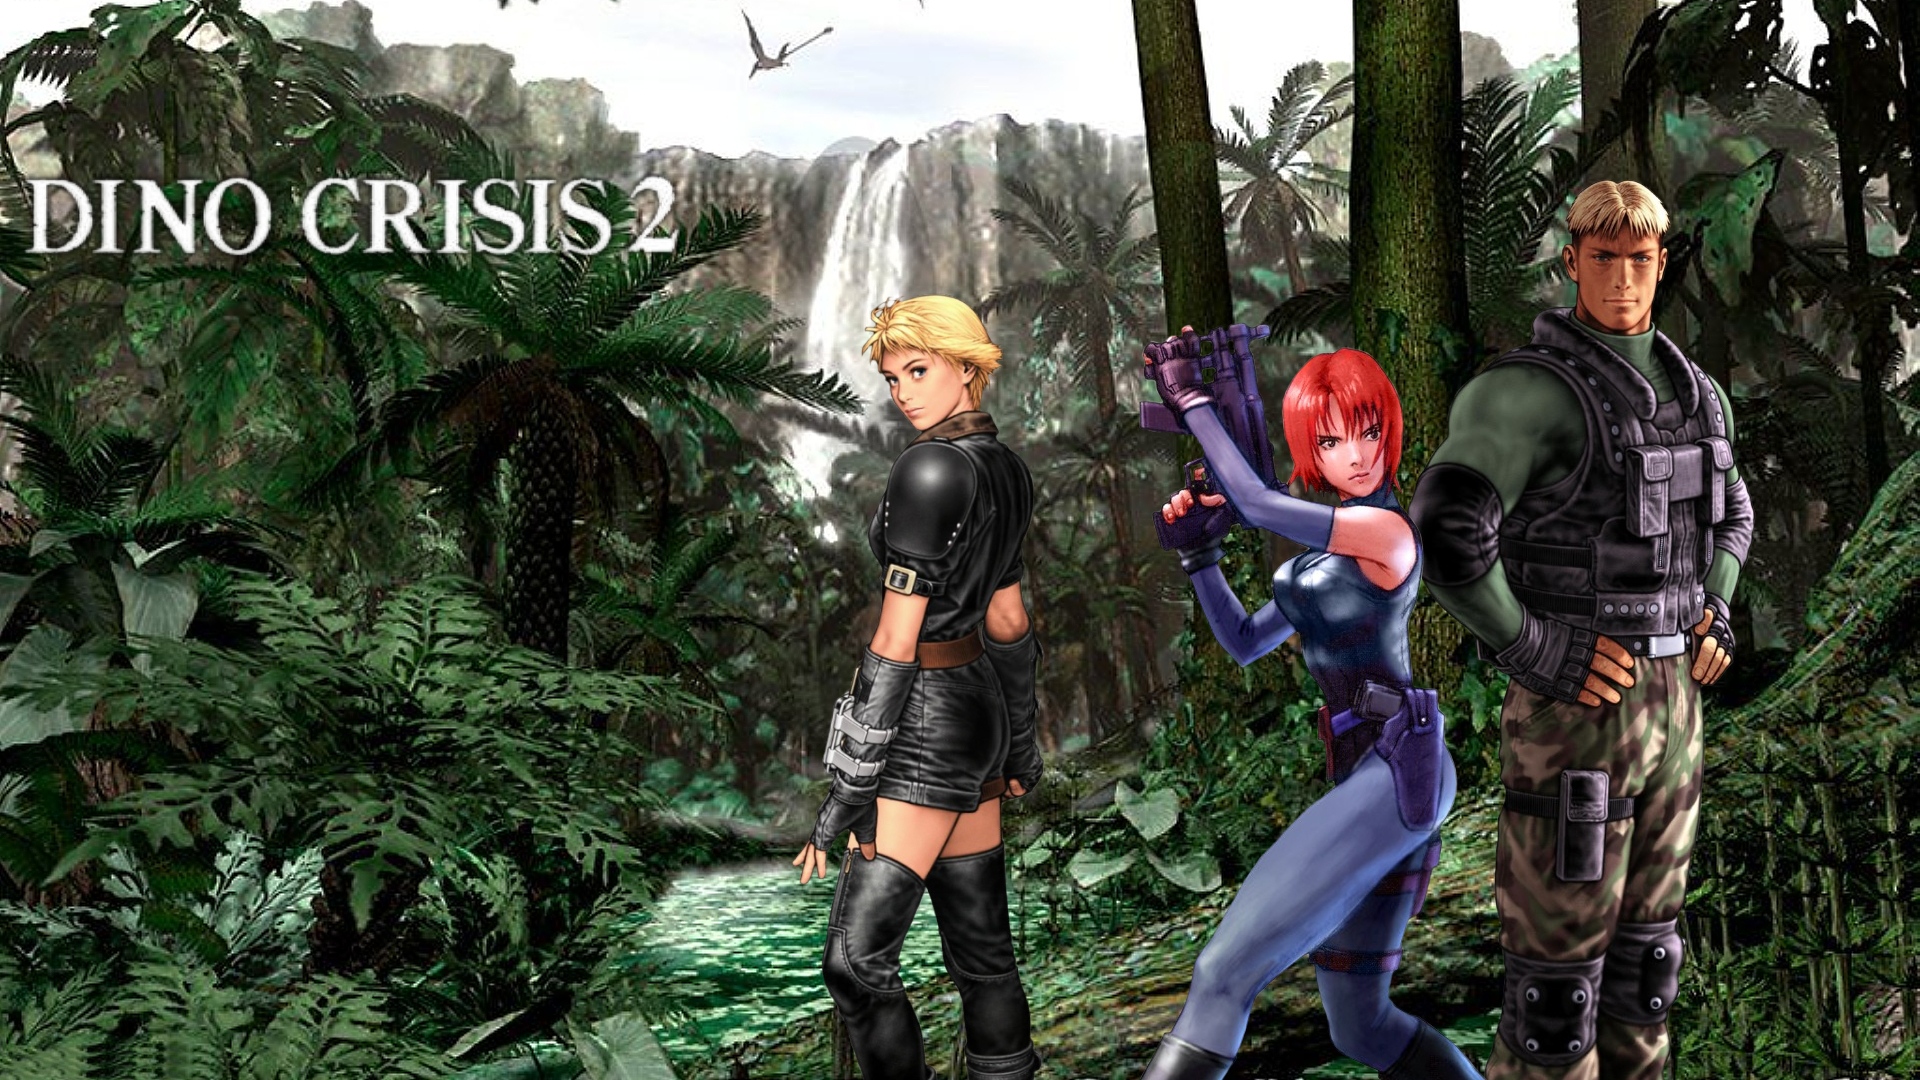 Video Game Dino Crisis 2 HD Wallpaper | Background Image